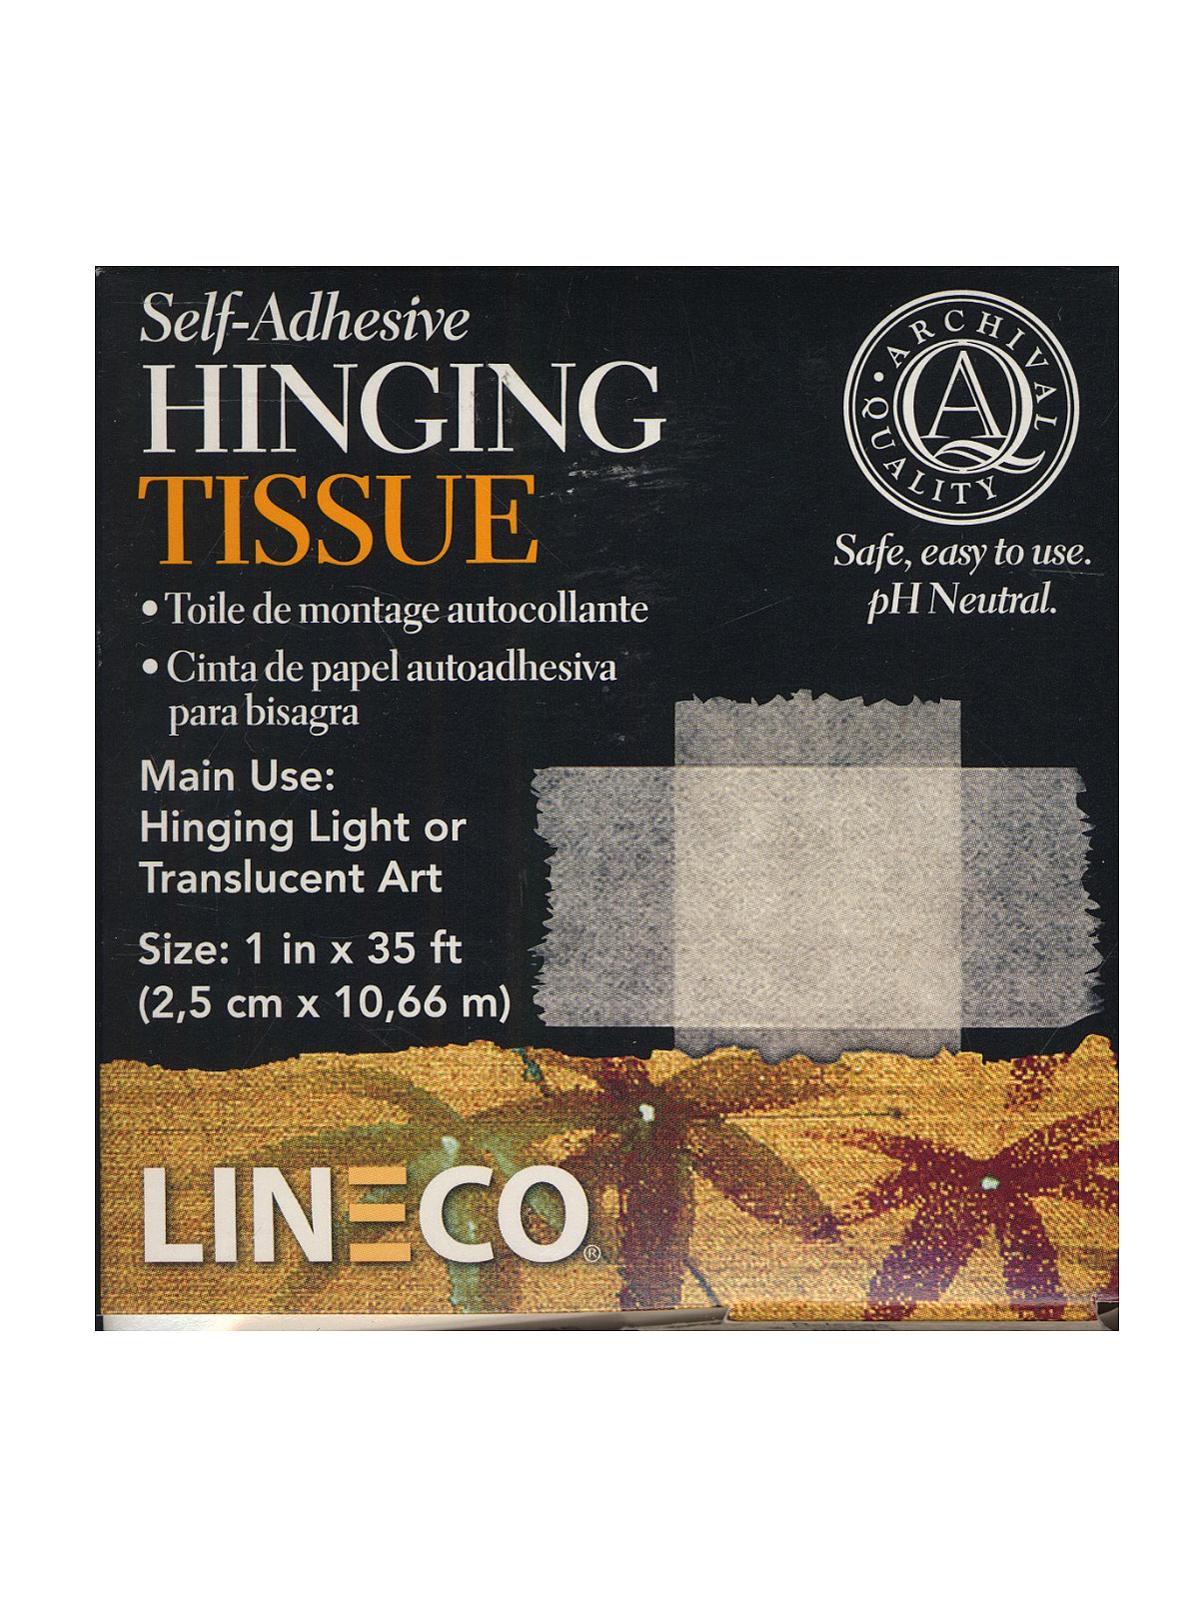 Self-adhesive Hinging Tissue 1 In. X 35 Ft.